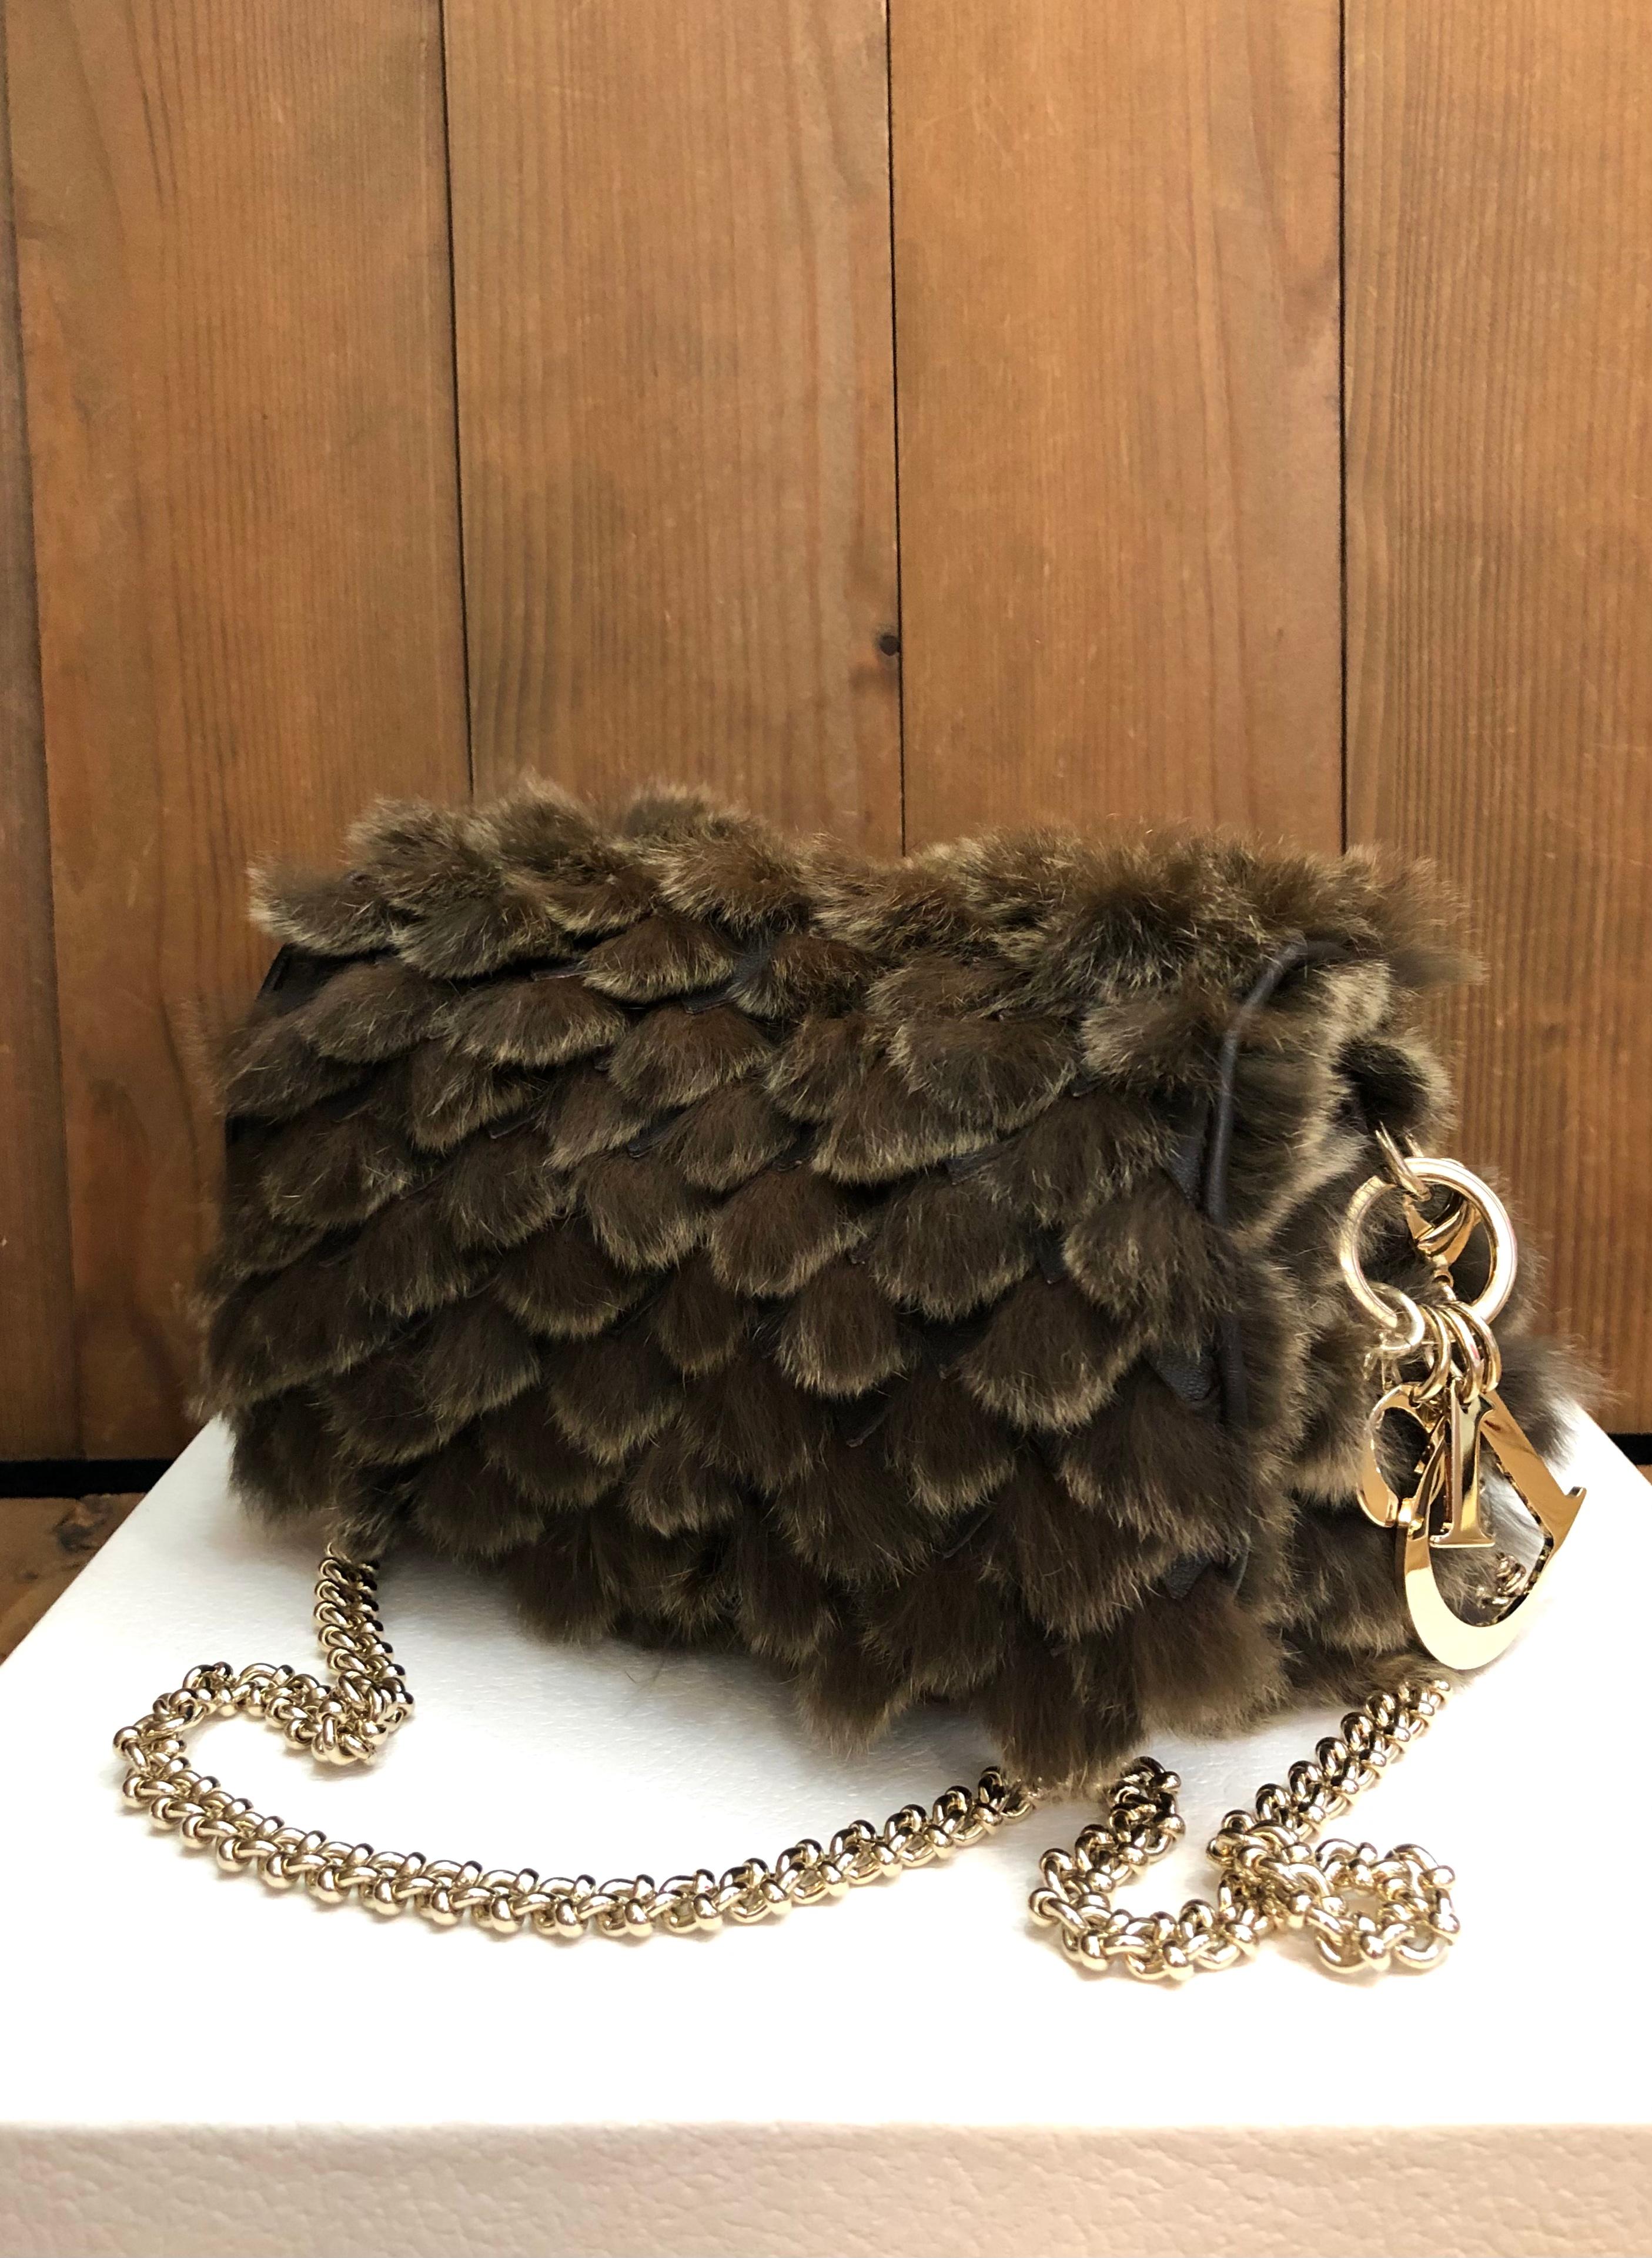 This exquisite CHRISTIAN DIOR chain bag is crafted of brown/gray rabbit and lambskin leather featuring gold toned hardware and a gold toned DIOR charm. Front flap magnetic snap closure. This Dior chain bag features a detachable gold toned chain to